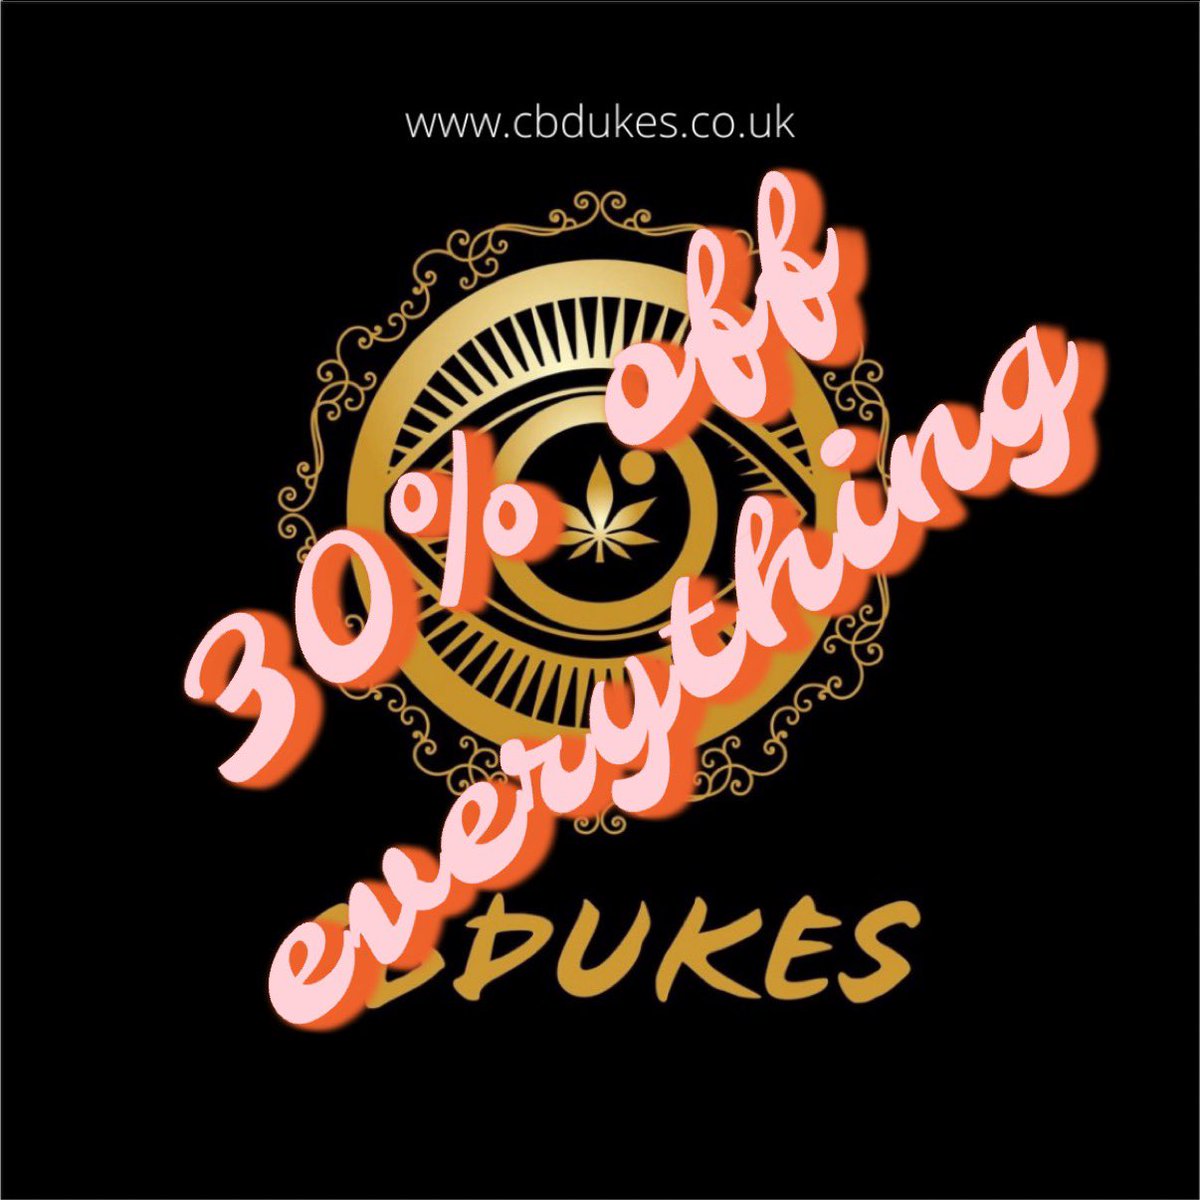 Since prices are rising on every aspect of our lives here’s a little thanks to everyone for their continued support. For the full month of October we have an online only discount of 30% off absolutely everything we sell. Use code autumn22 at Cbdukes.co.uk